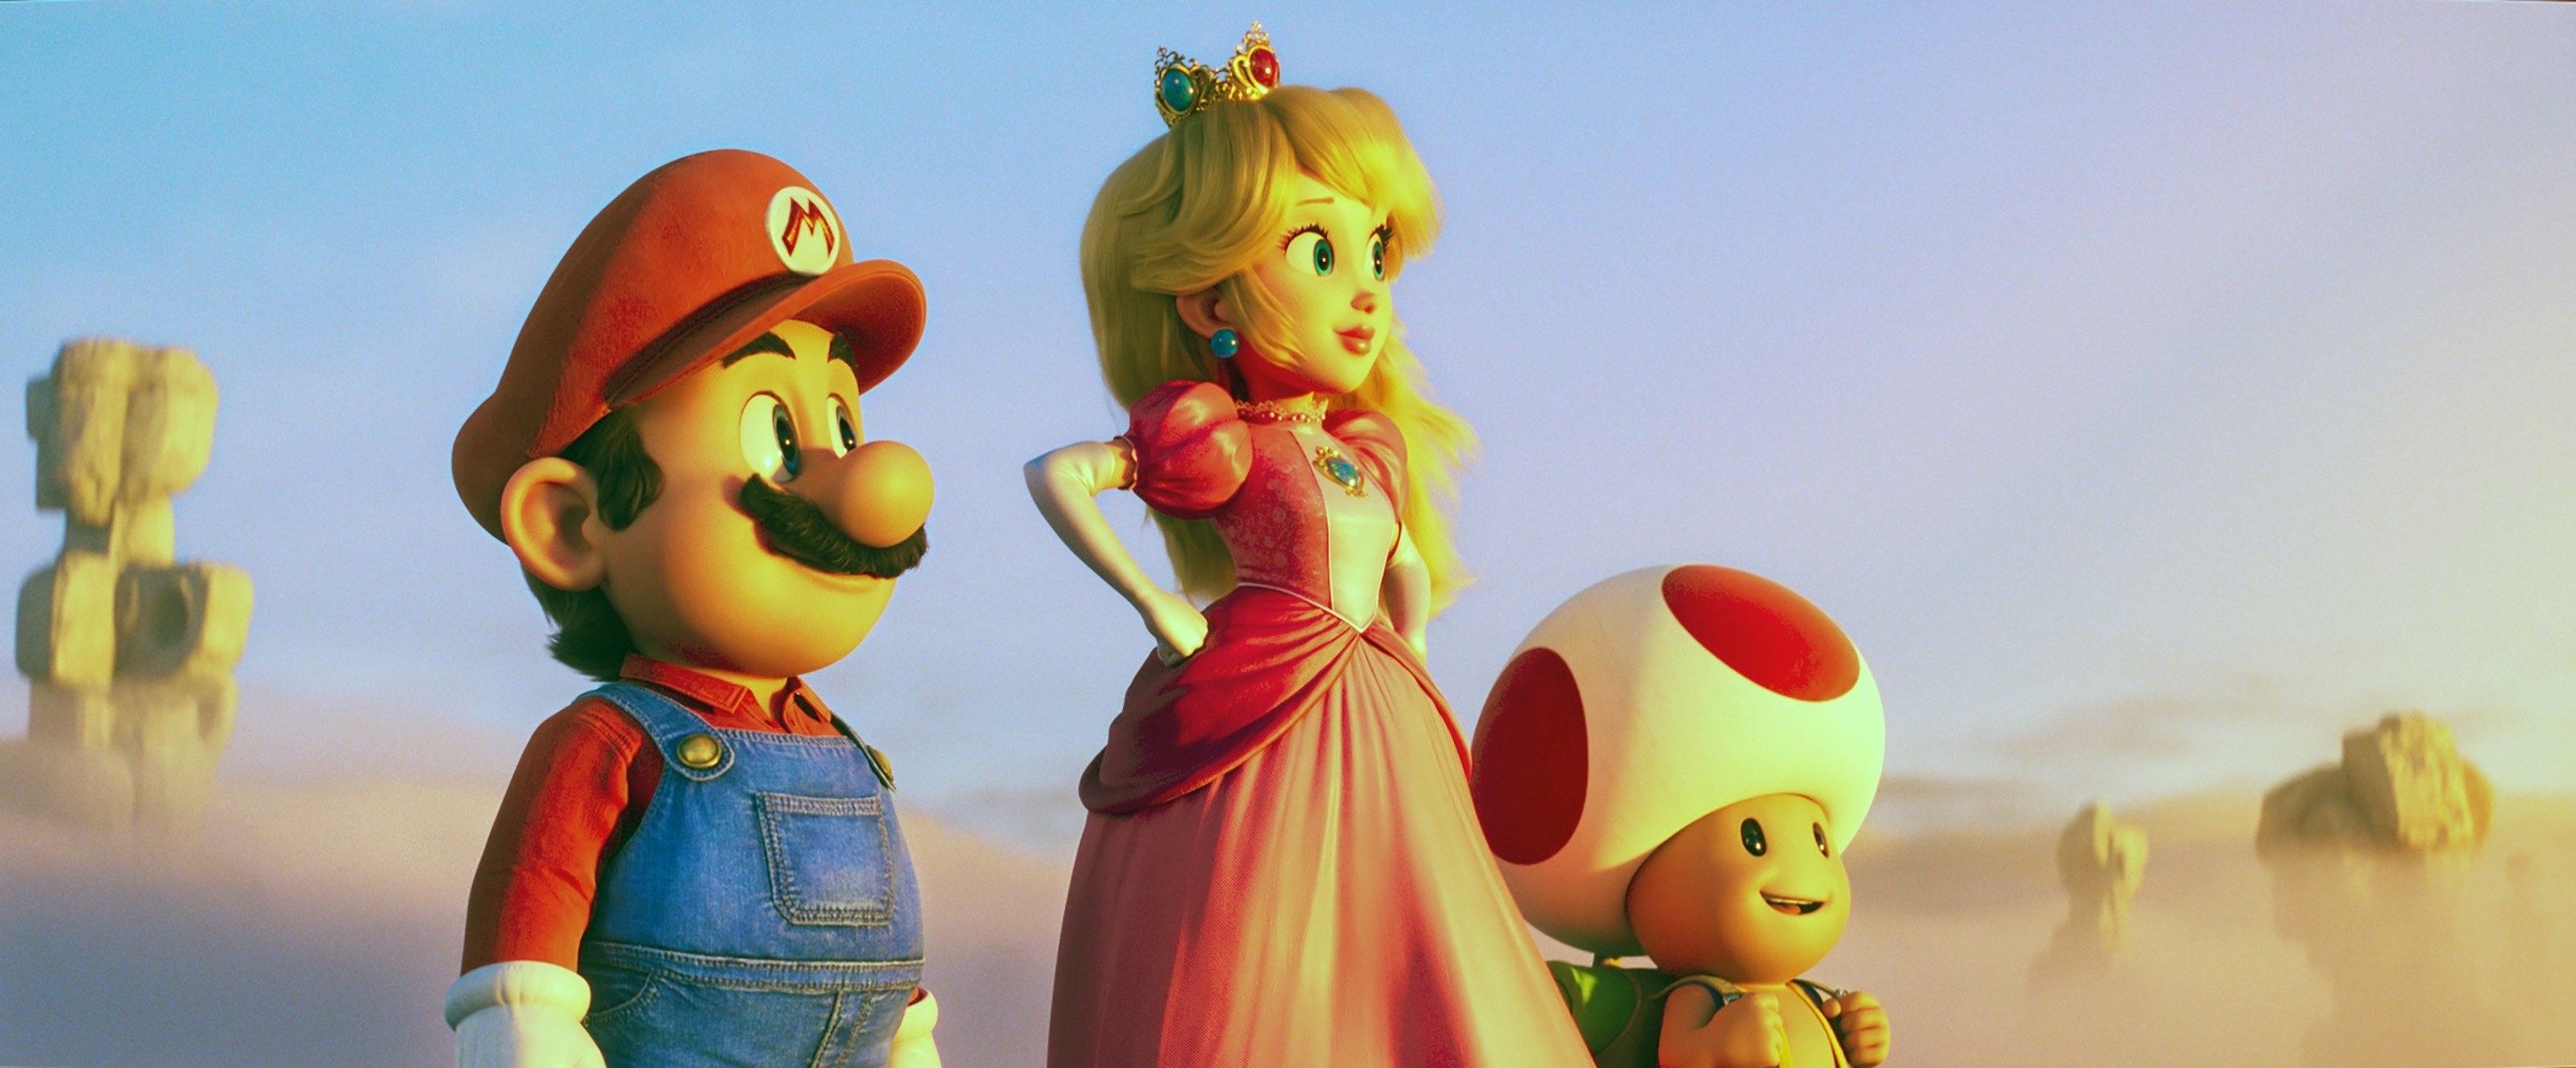 Mario, Peach, and Toad all stand together